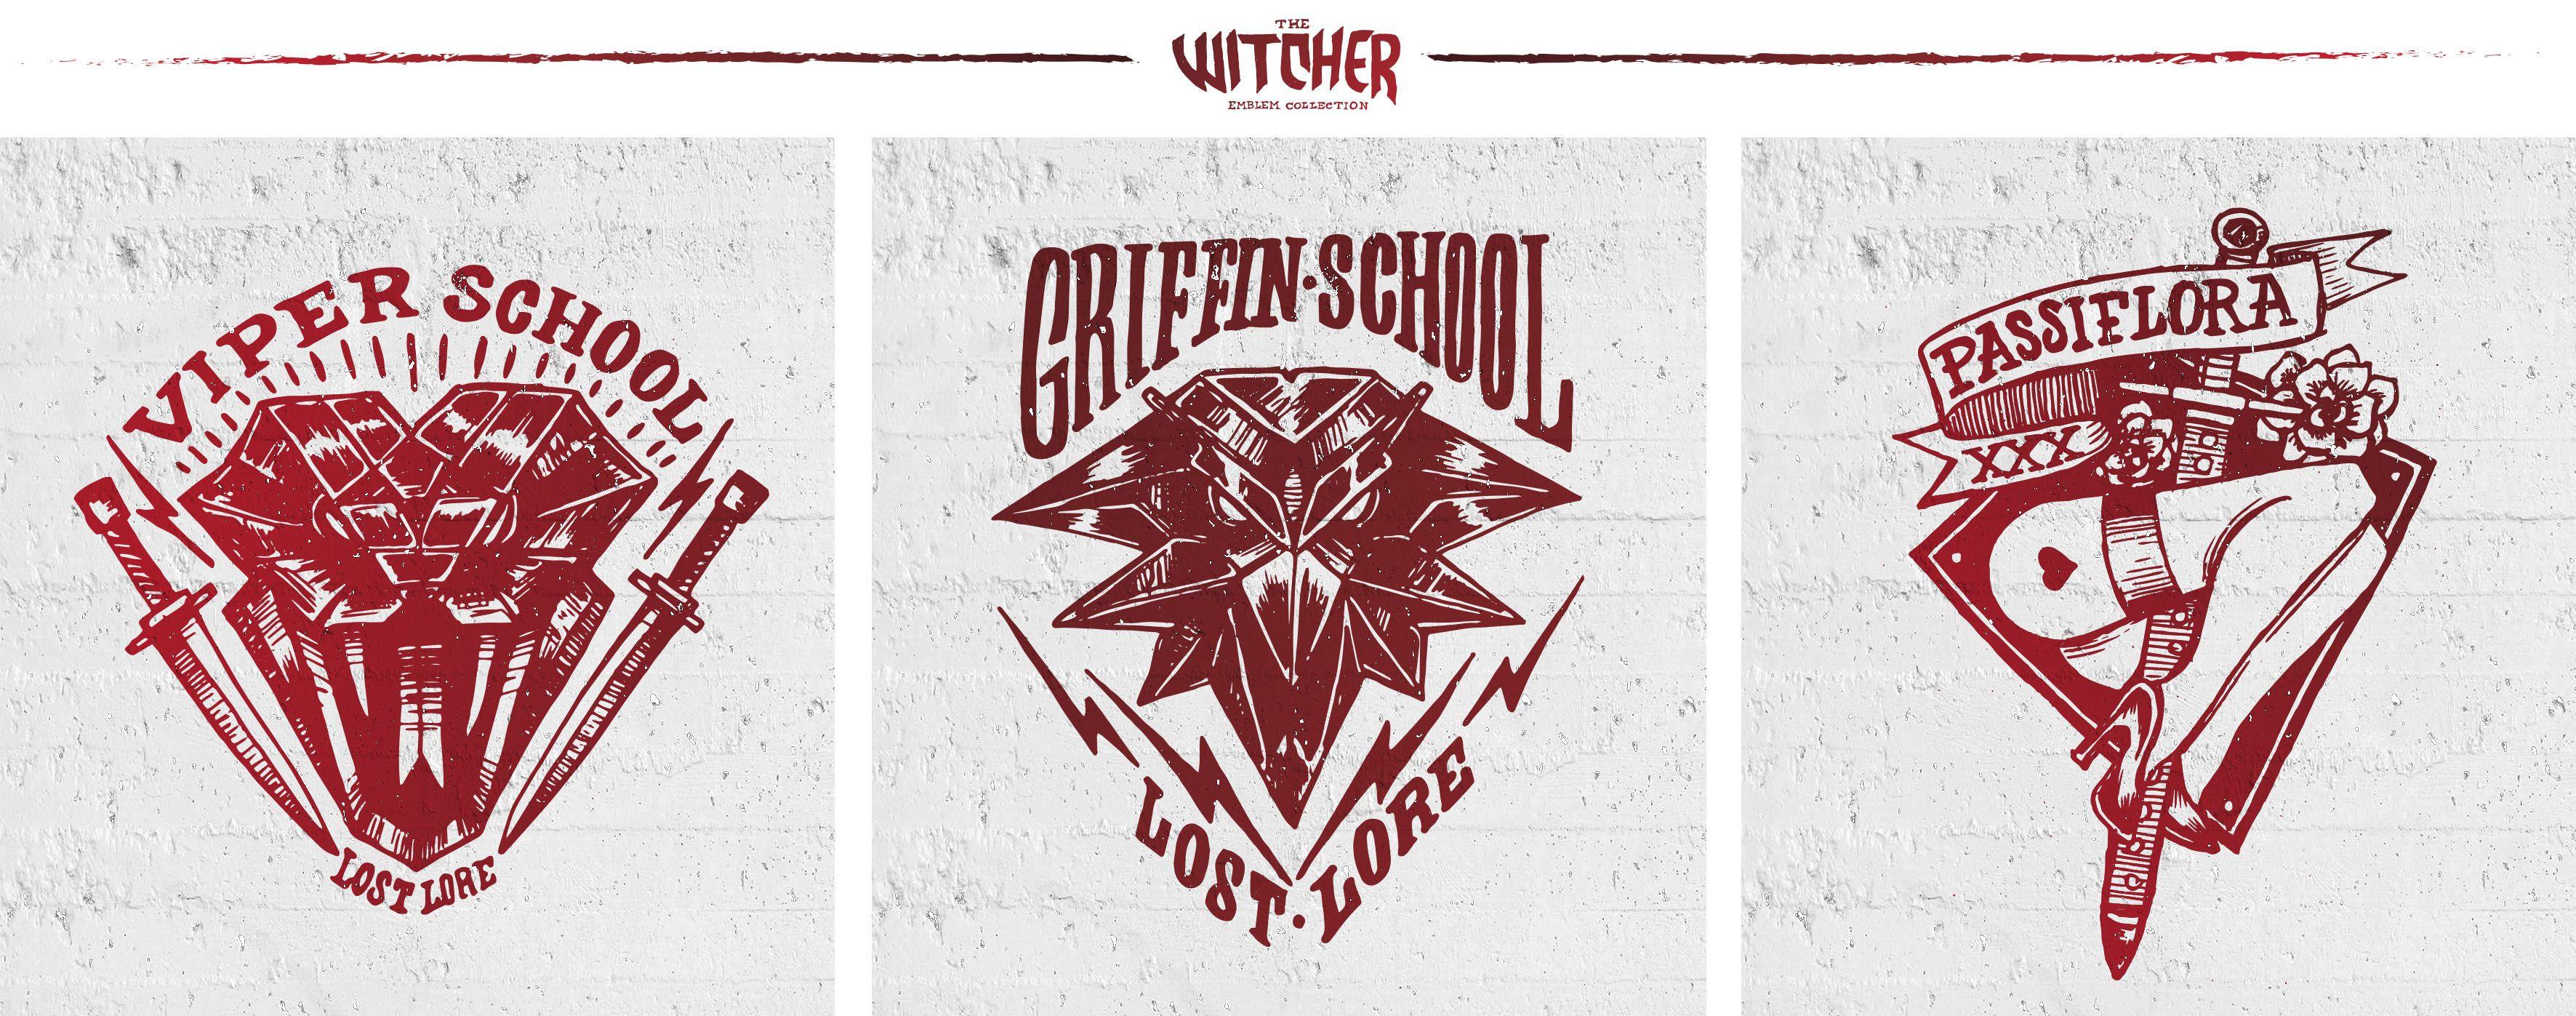 Witcher Logo - The Witcher Emblem Collection on Behance